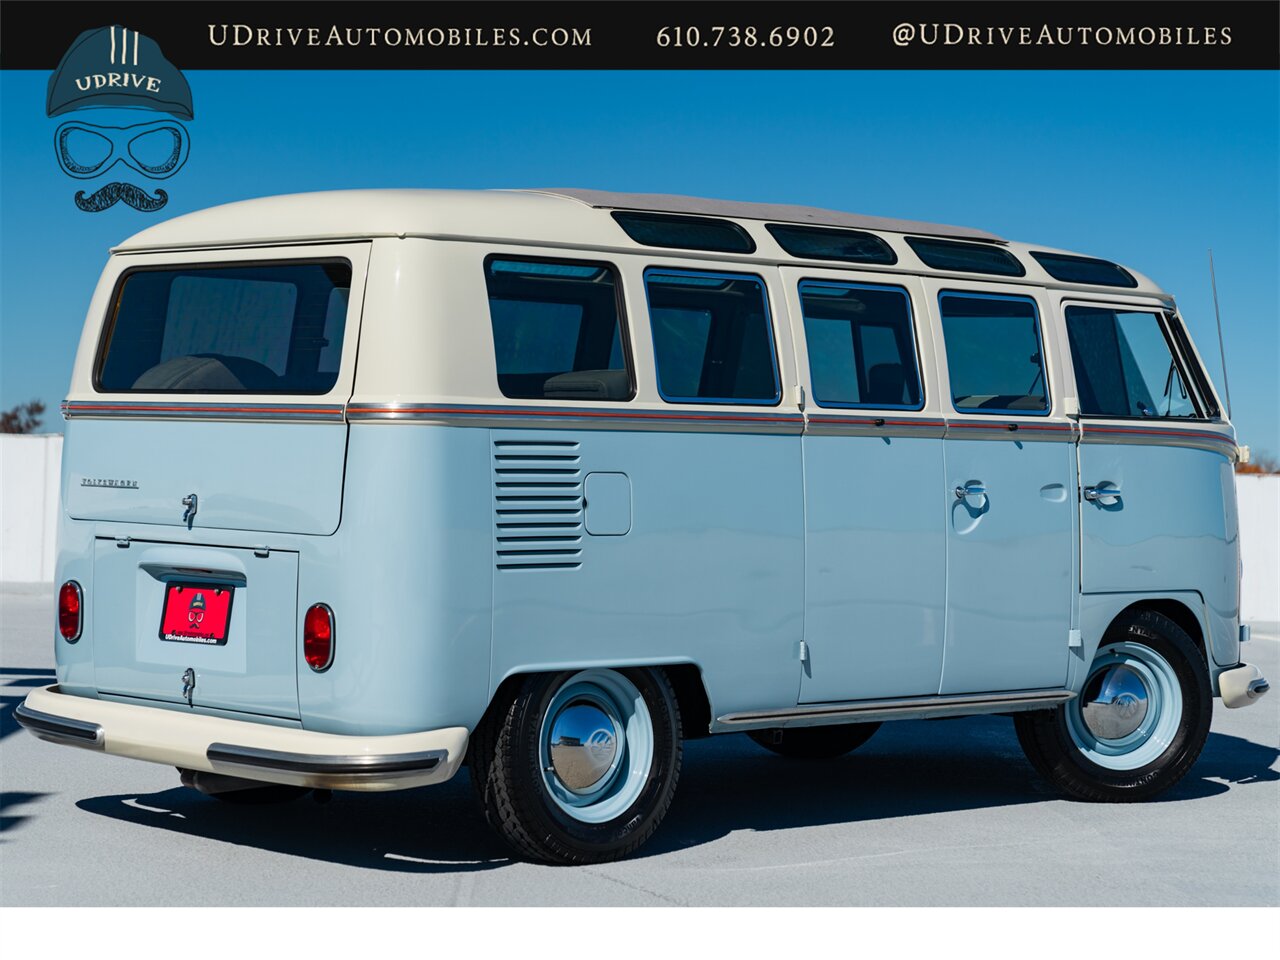 1965 Volkswagen Bus/Vanagon 21 Window Deluxe Transporter  Built By East Coast VW Restorations 1914cc A/C - Photo 2 - West Chester, PA 19382